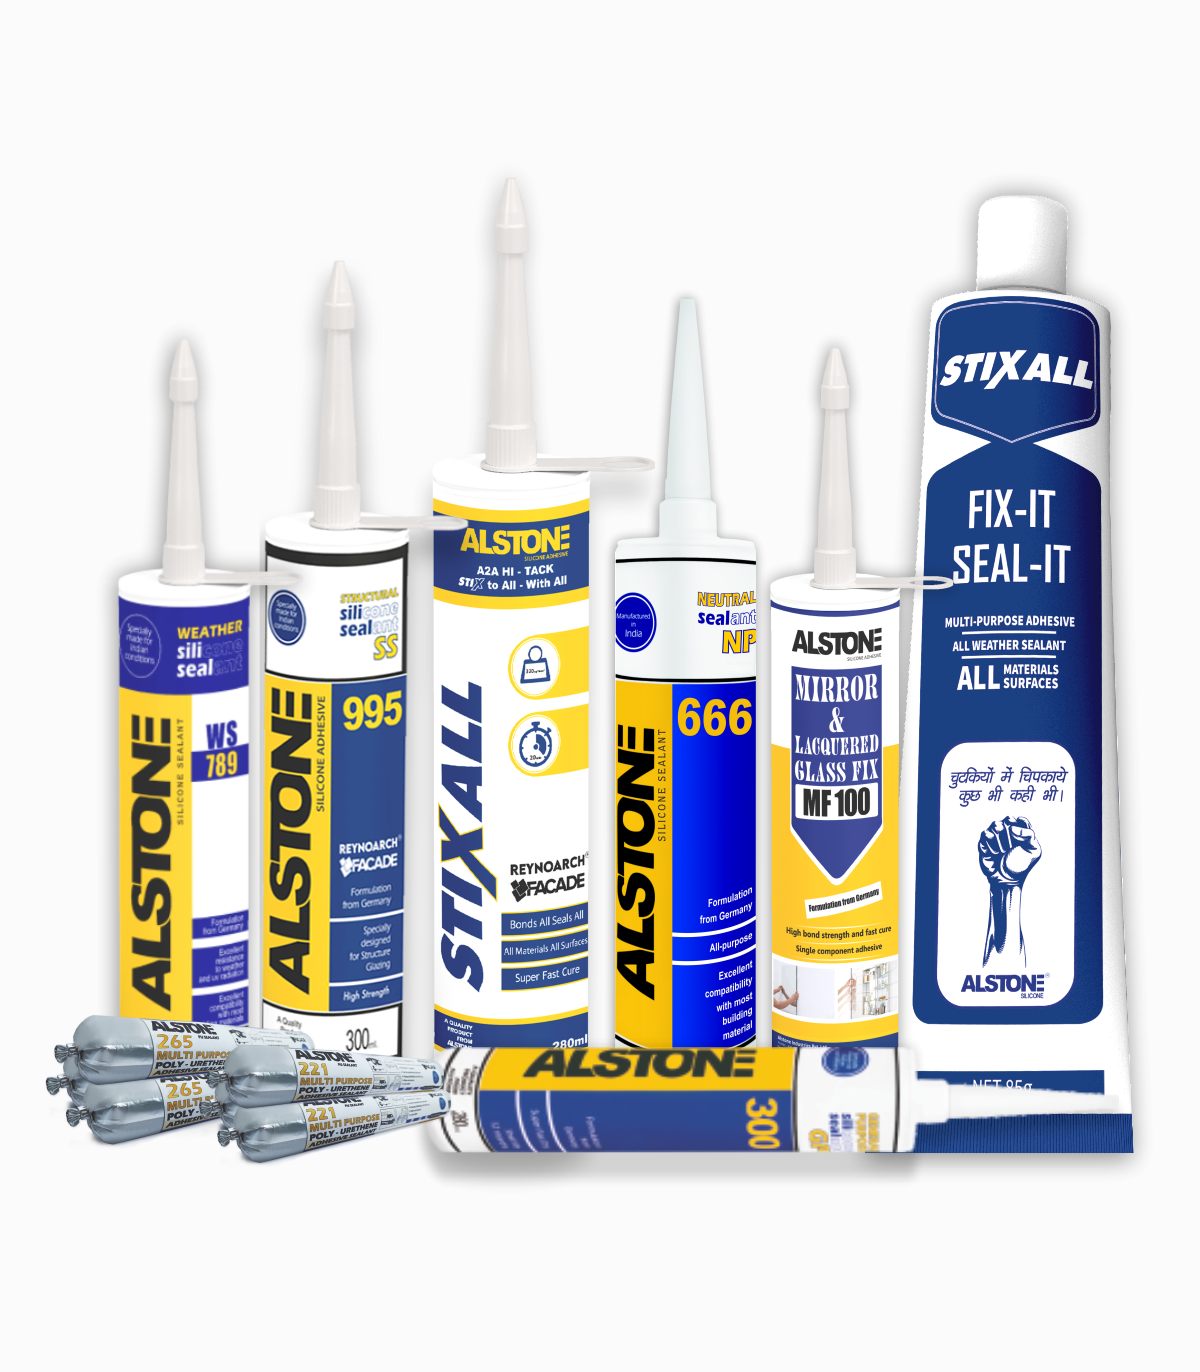 Silicone Sealant Manufacturer  Buy Silicone Sealants Online